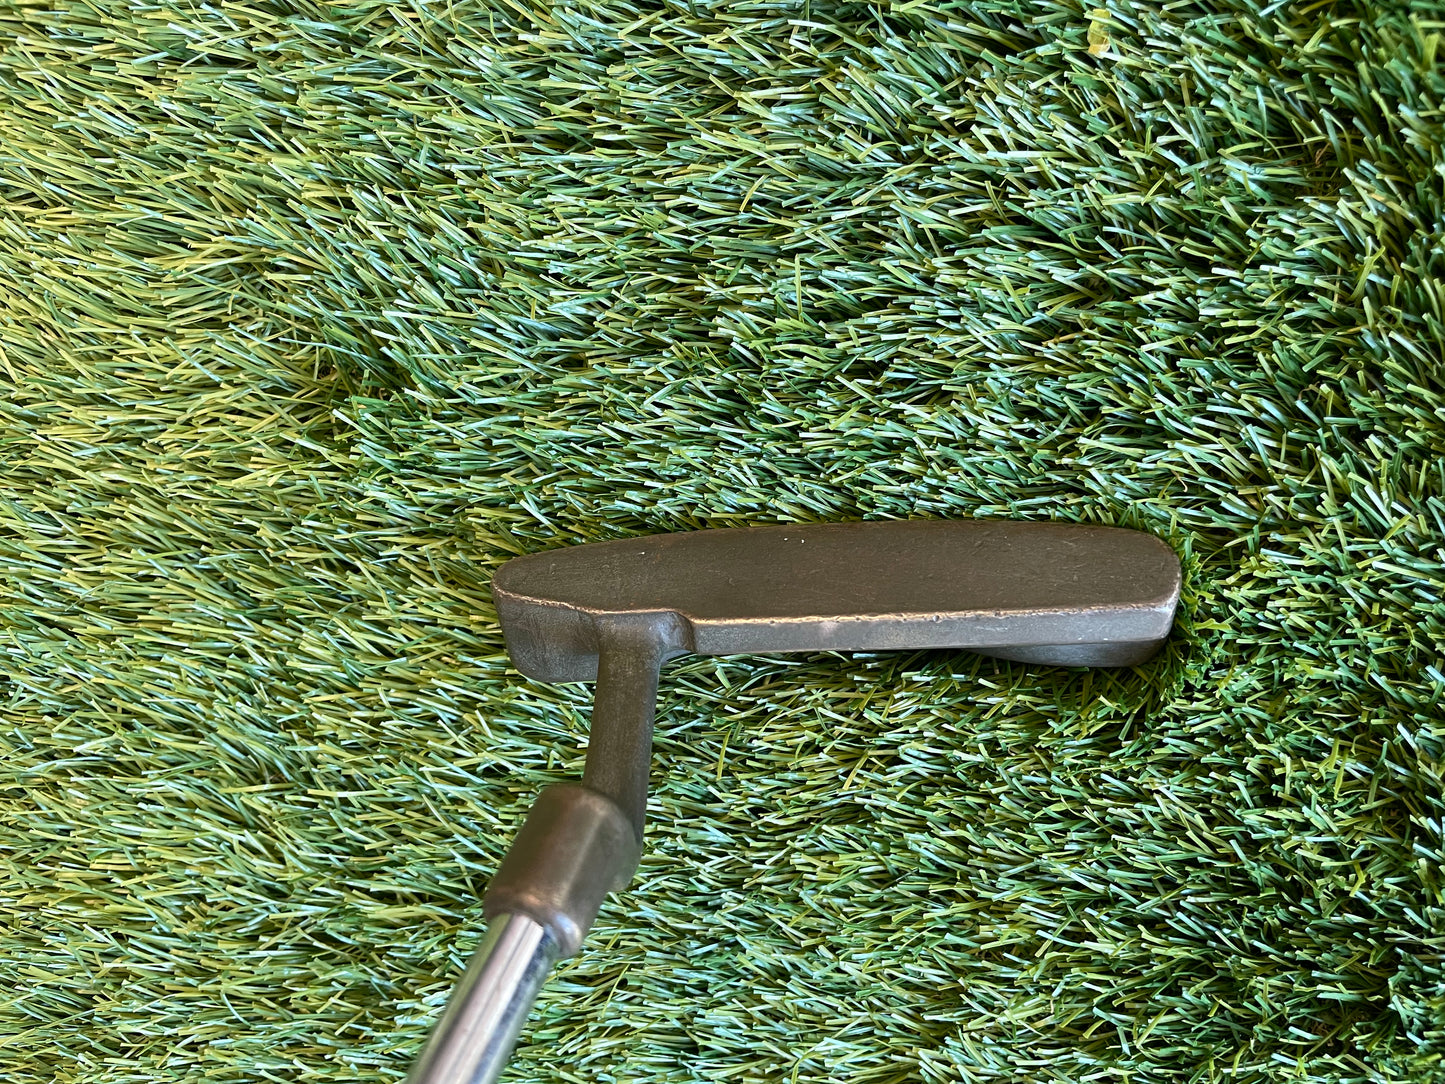 PING A BLADE 36 INCH PUTTER